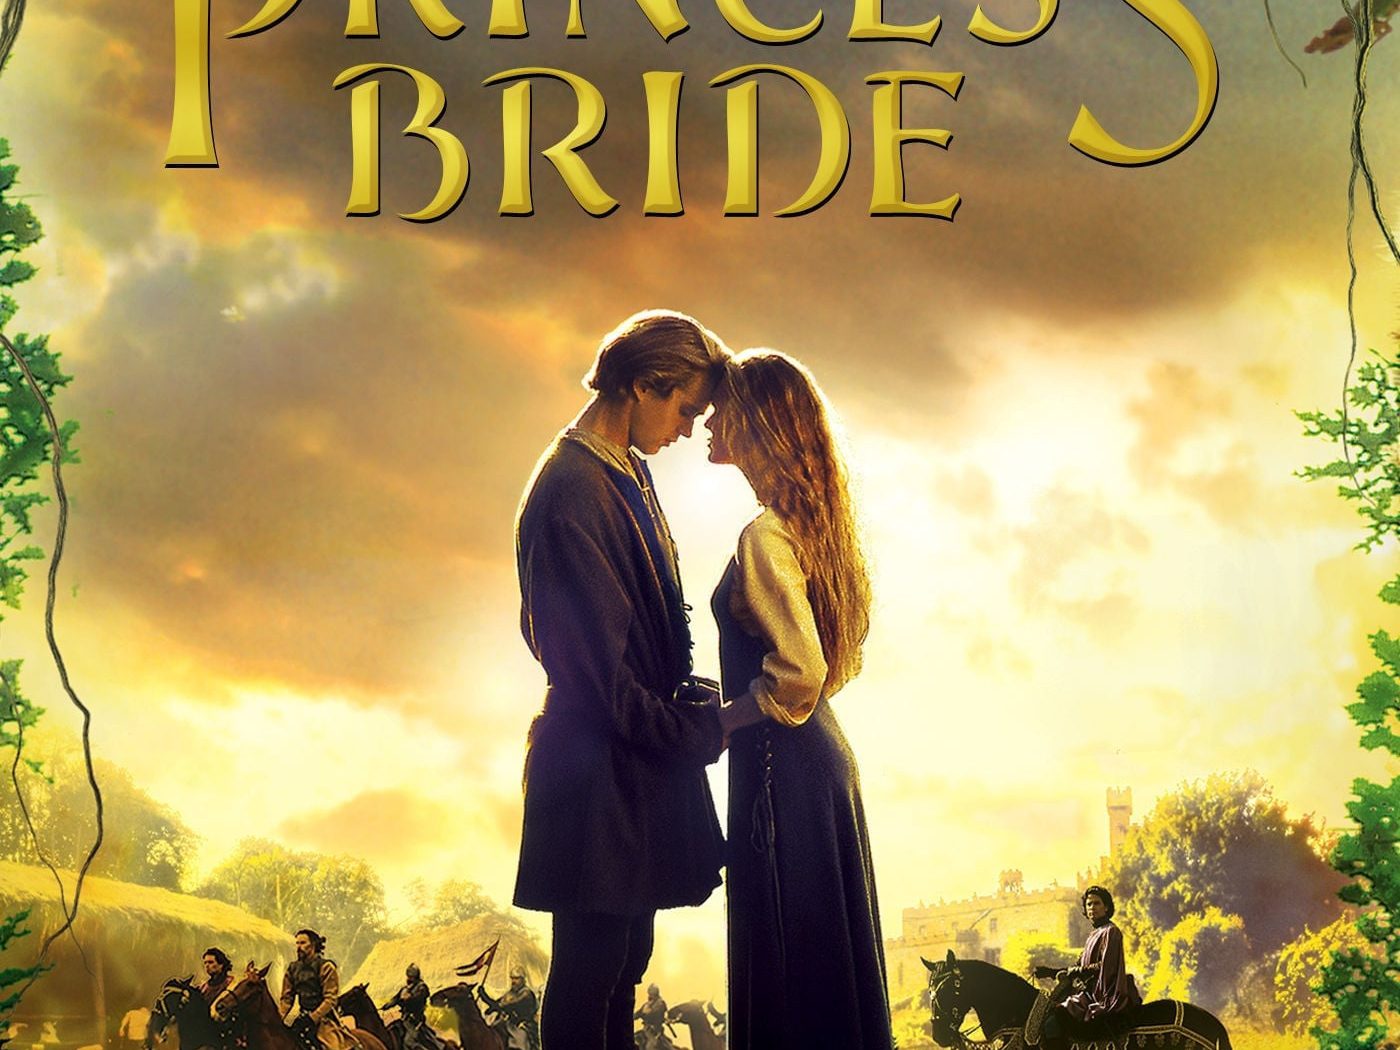 Poster for the movie "The Princess Bride"